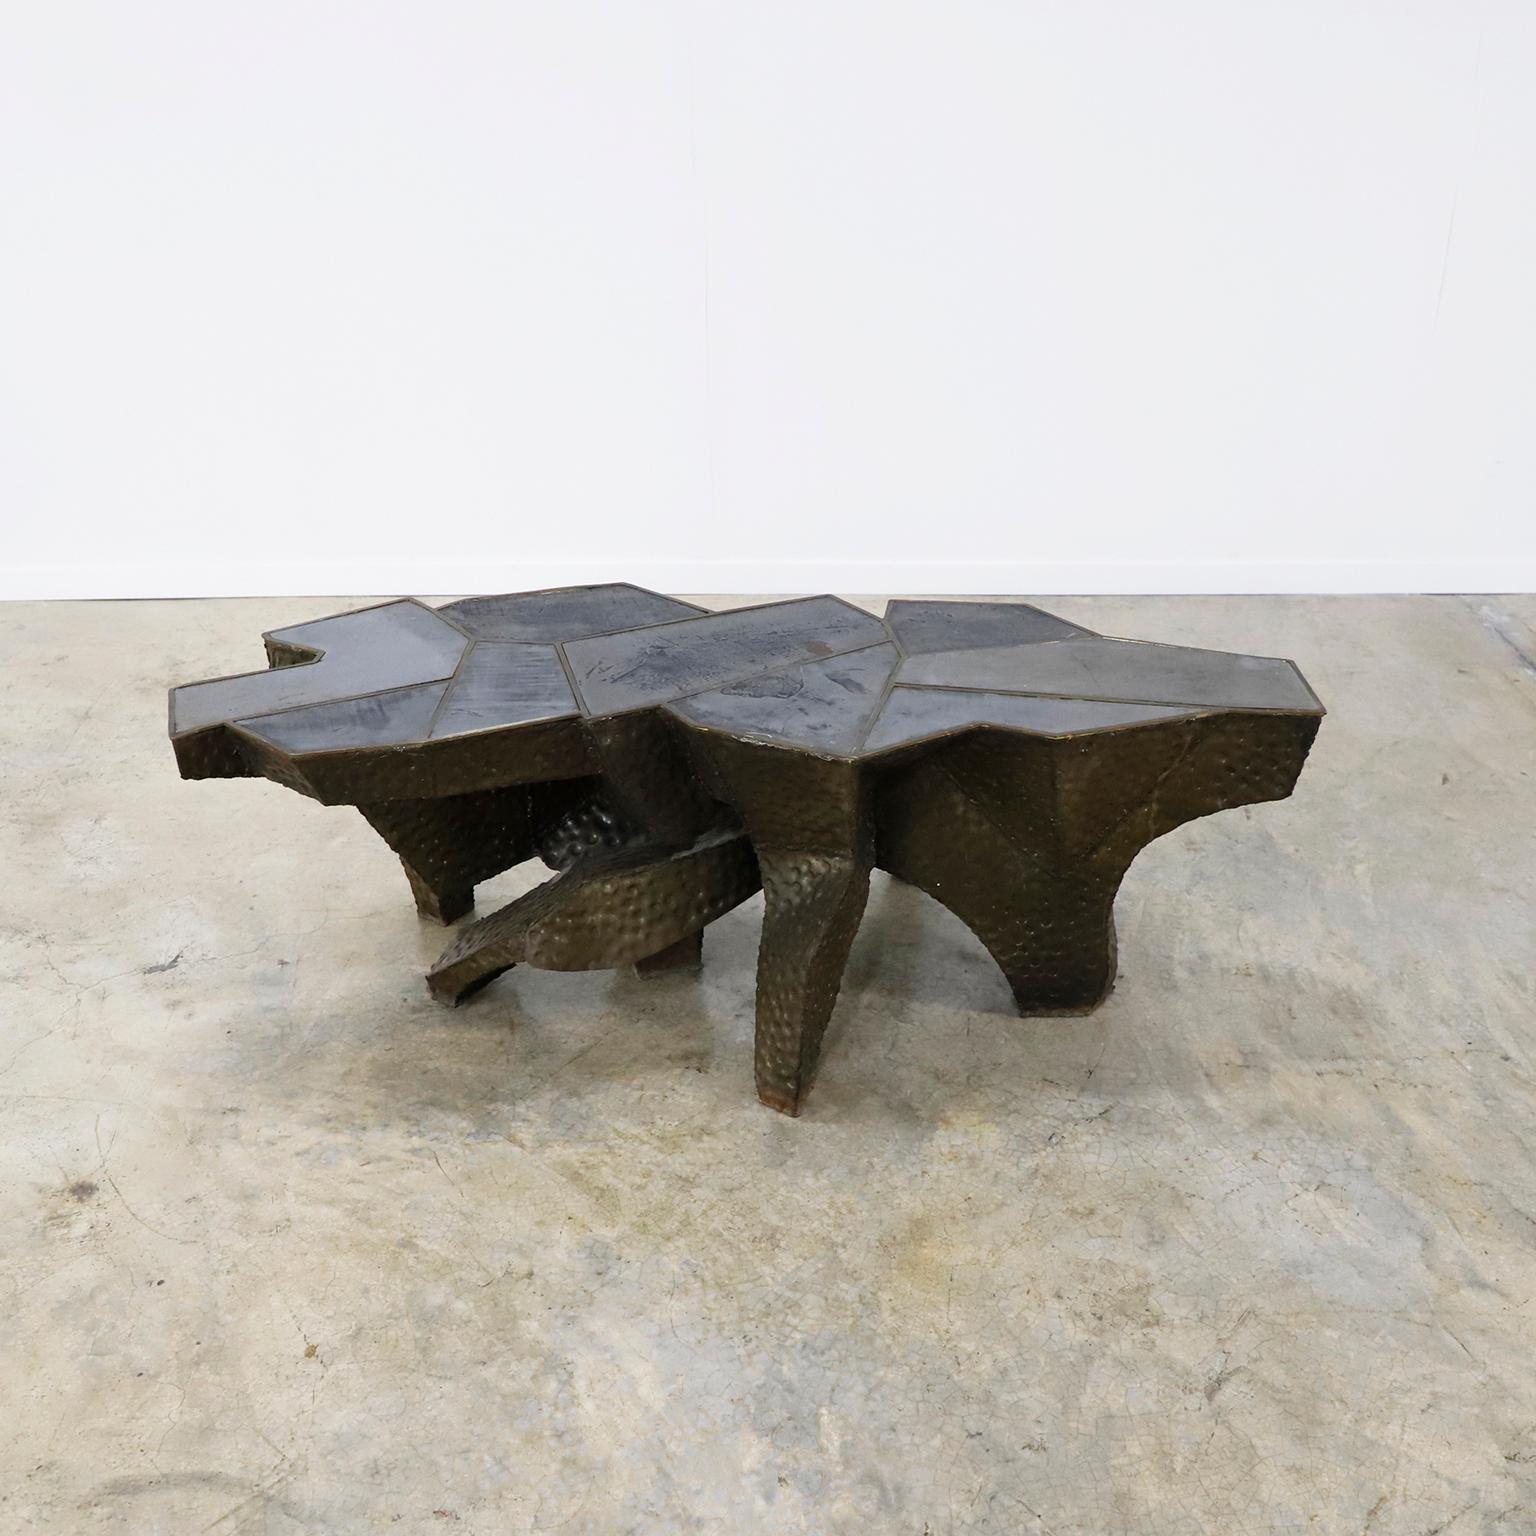 Circa 1960. We offer this Rare Pair of Handmade Brutalist Side Tables. made in brass and solid iron plates on the table cover. Beautiful tables made a piece of art
